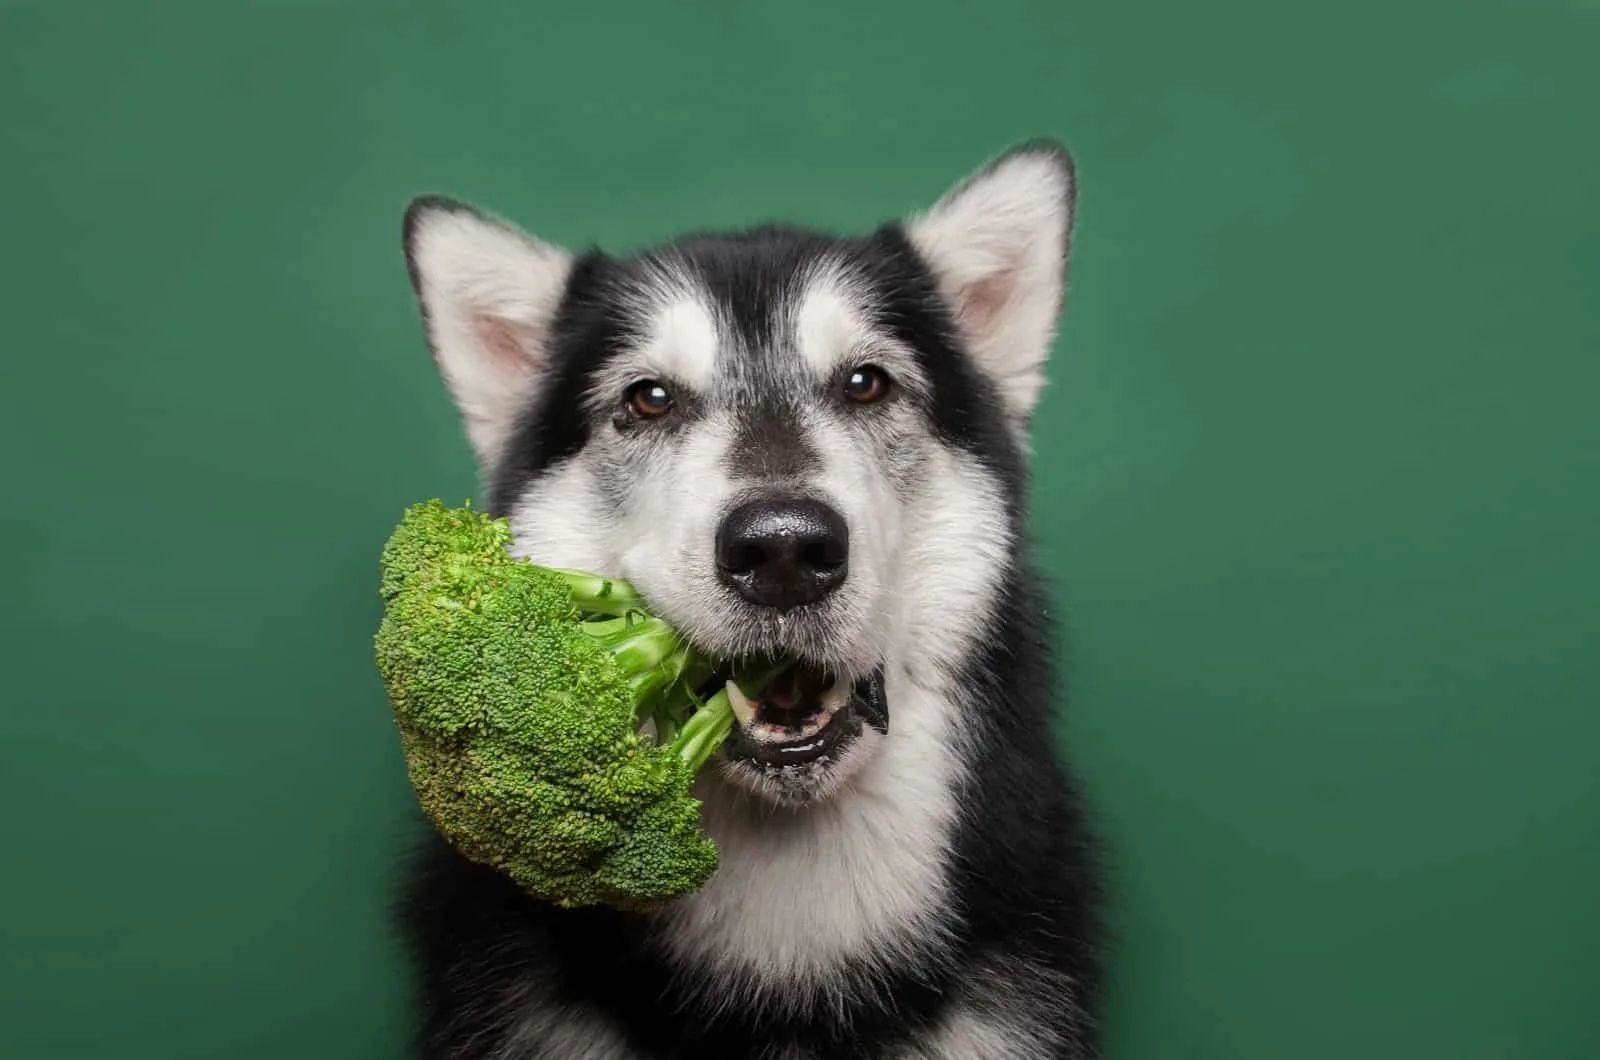 Alaskan Malamute with food in mouth